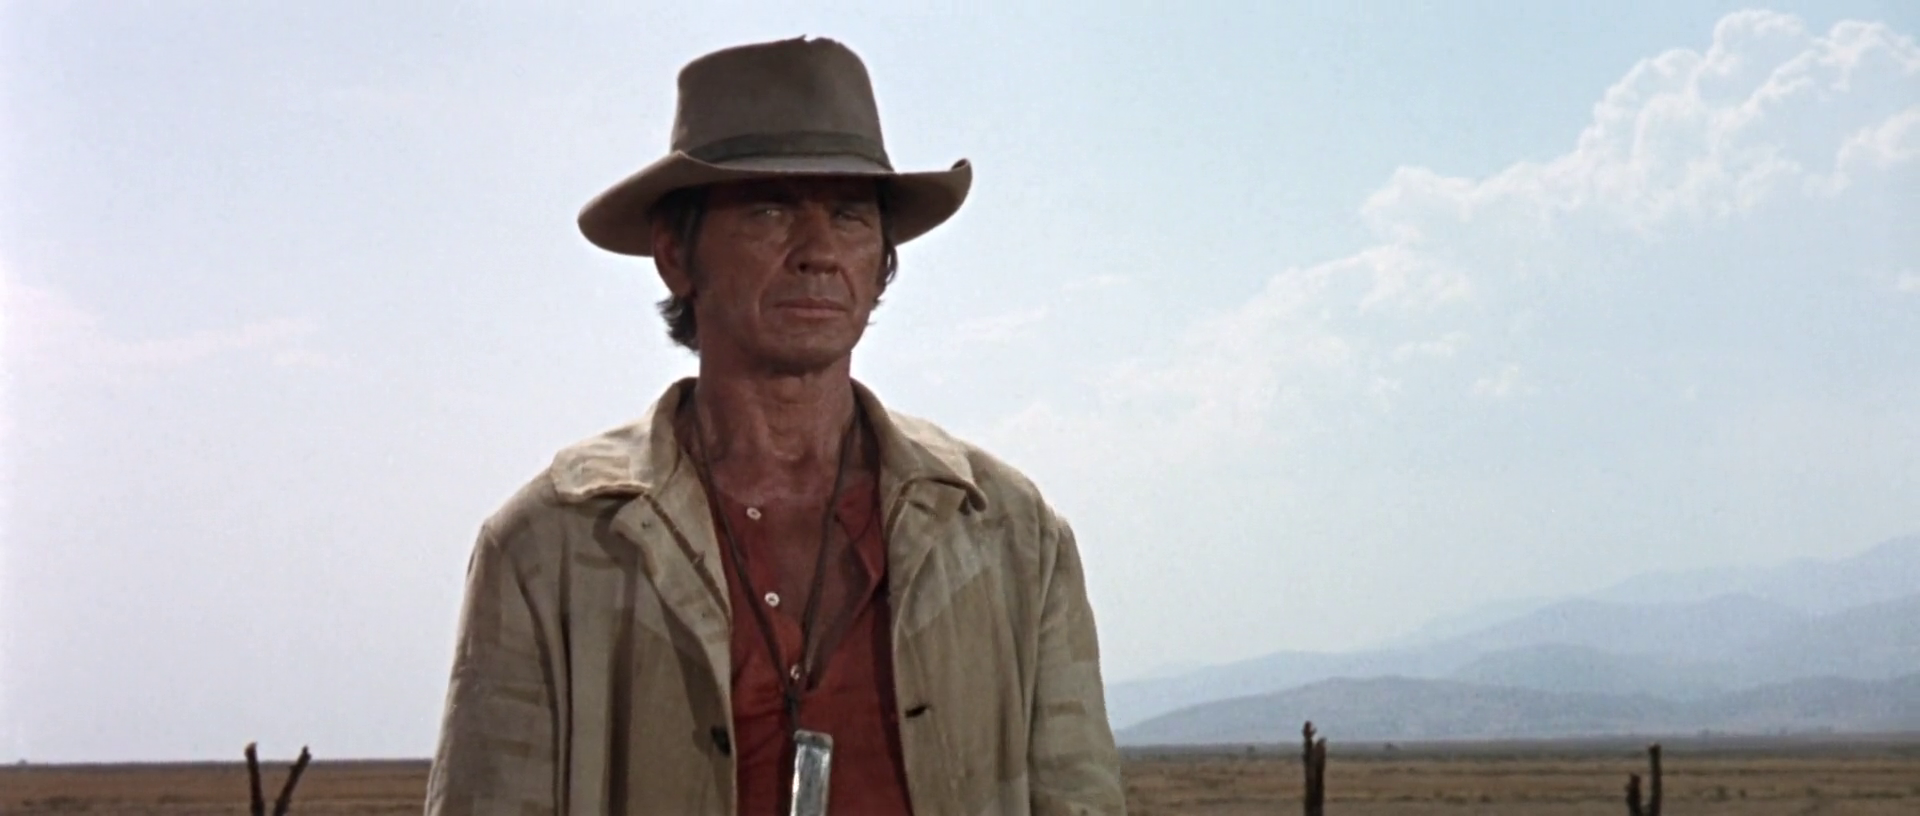 Once Upon a Time in the West 1968 Henry Fonda Charles Bronson 1080p H264 AC 3 DolbyDigital 5 1 nickarad